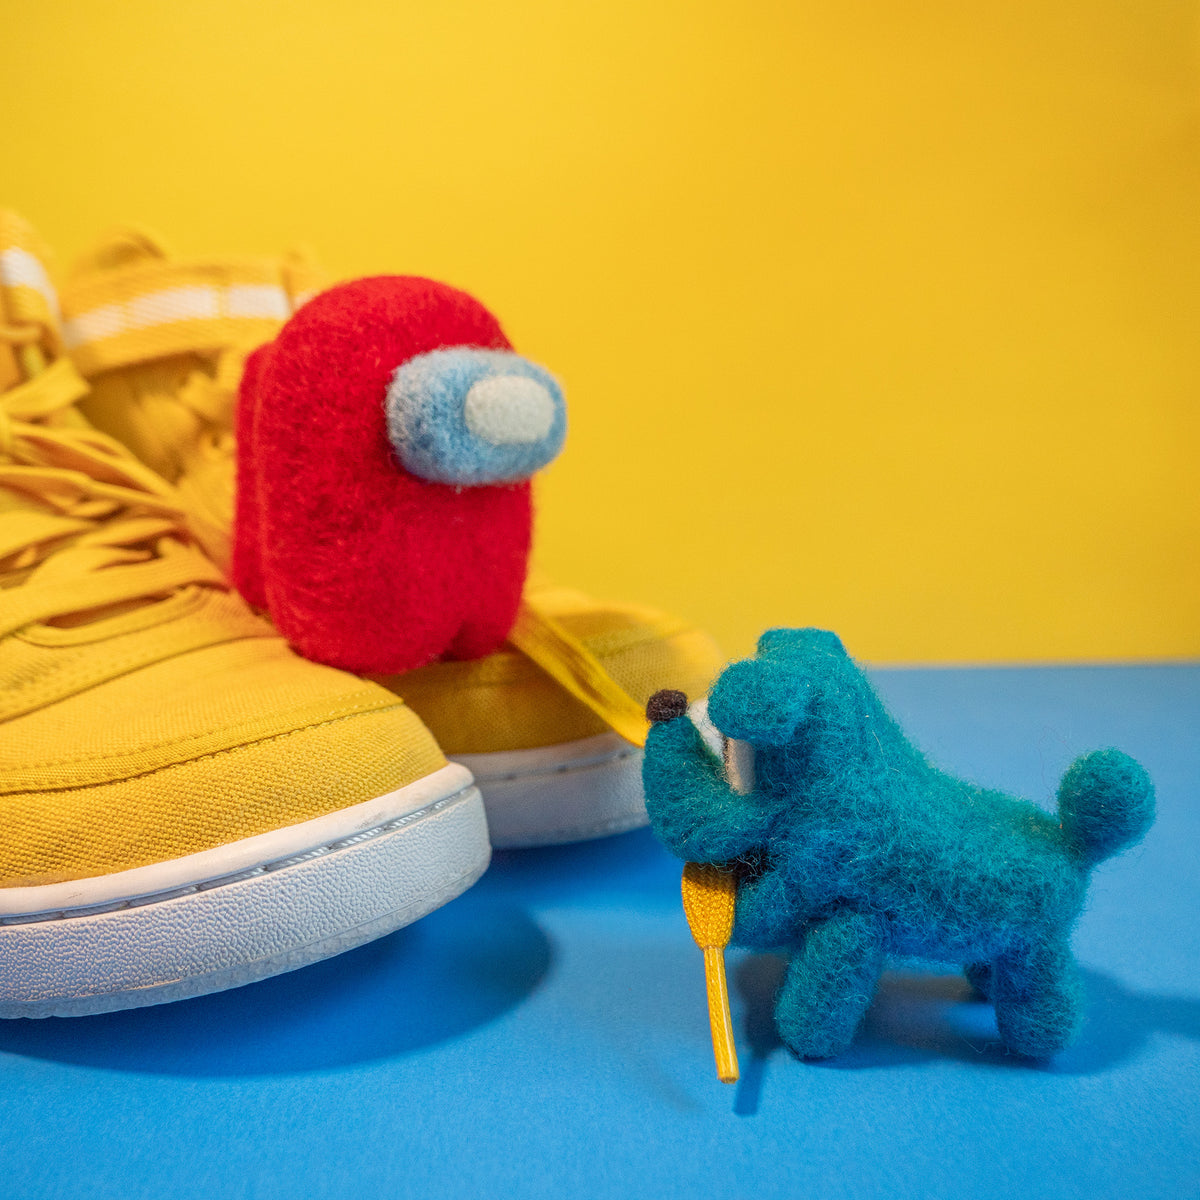 The felted crewmate and spacedog standing on a pair of yellow sneakers. The crewmate is watching the spacedog, who has the shoelace in its mouth.